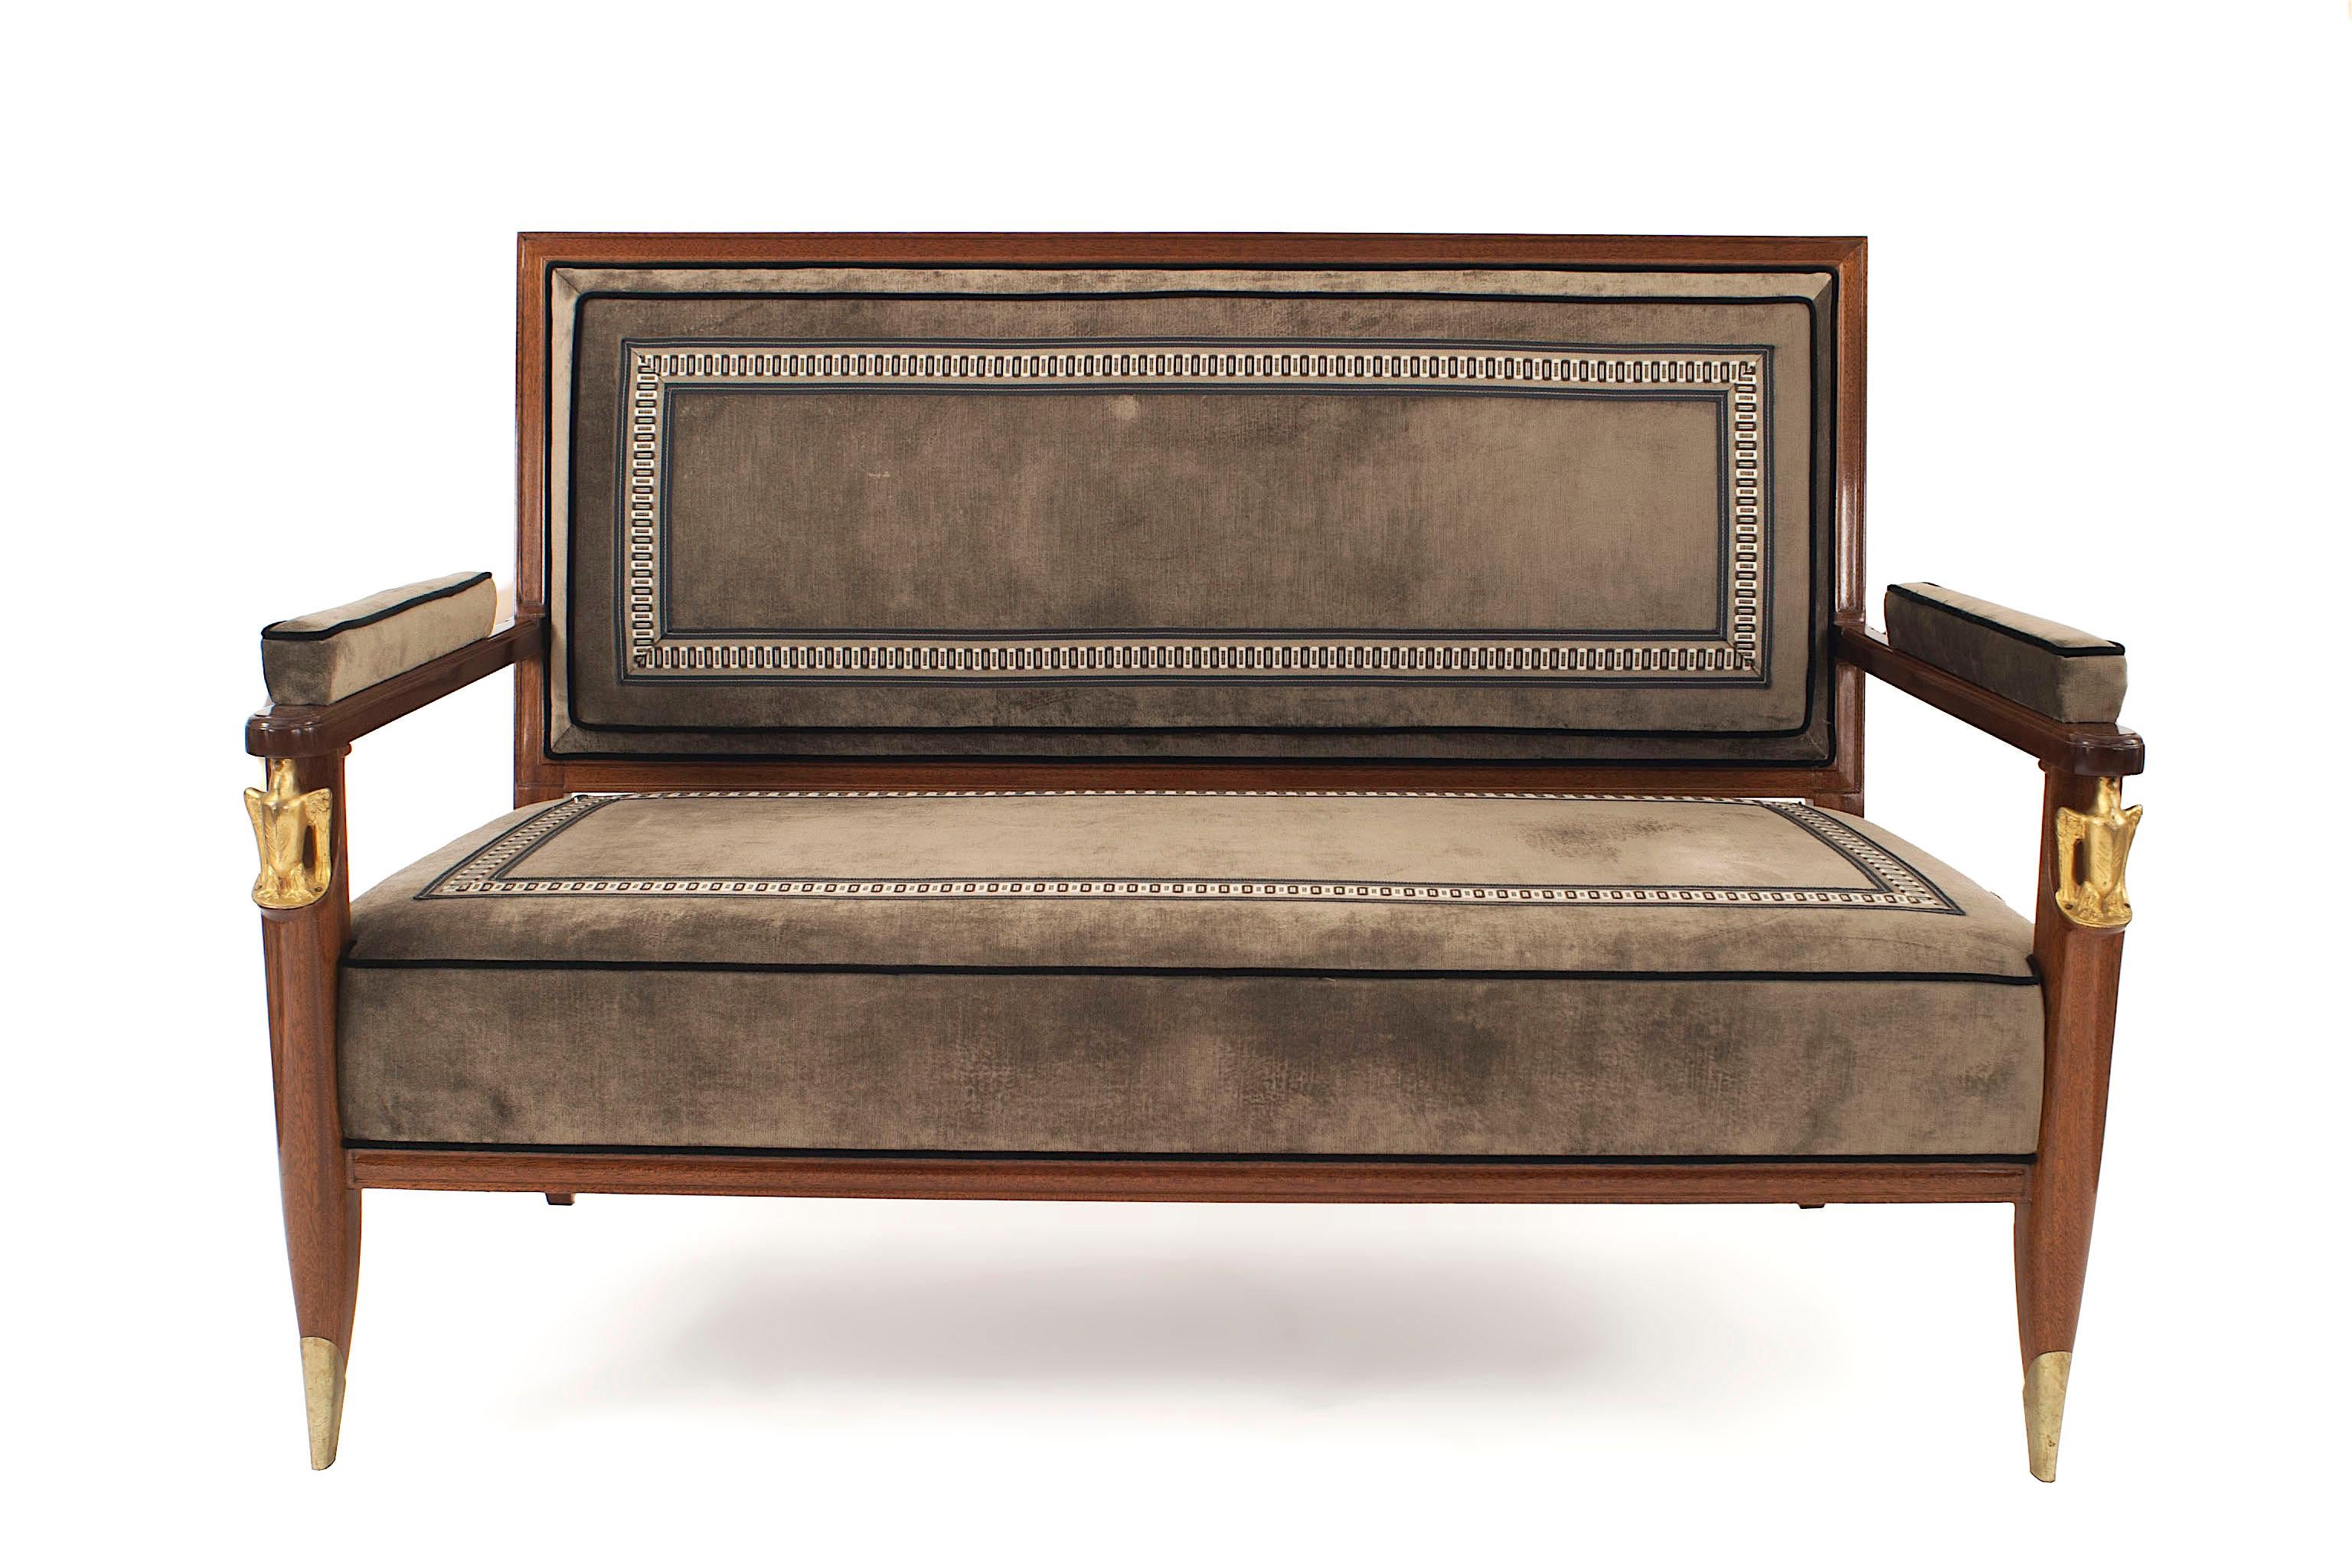 French mid-century dark mahogany settee with gilt bronze sabot feet and armrest supported by gilt bronze eagles with brown upholstery. Signed Jean Pascaud, by Vadim Androusov (ref: Les Decorateurs des annee 40, pg 172).


Jean Pascaud was born in